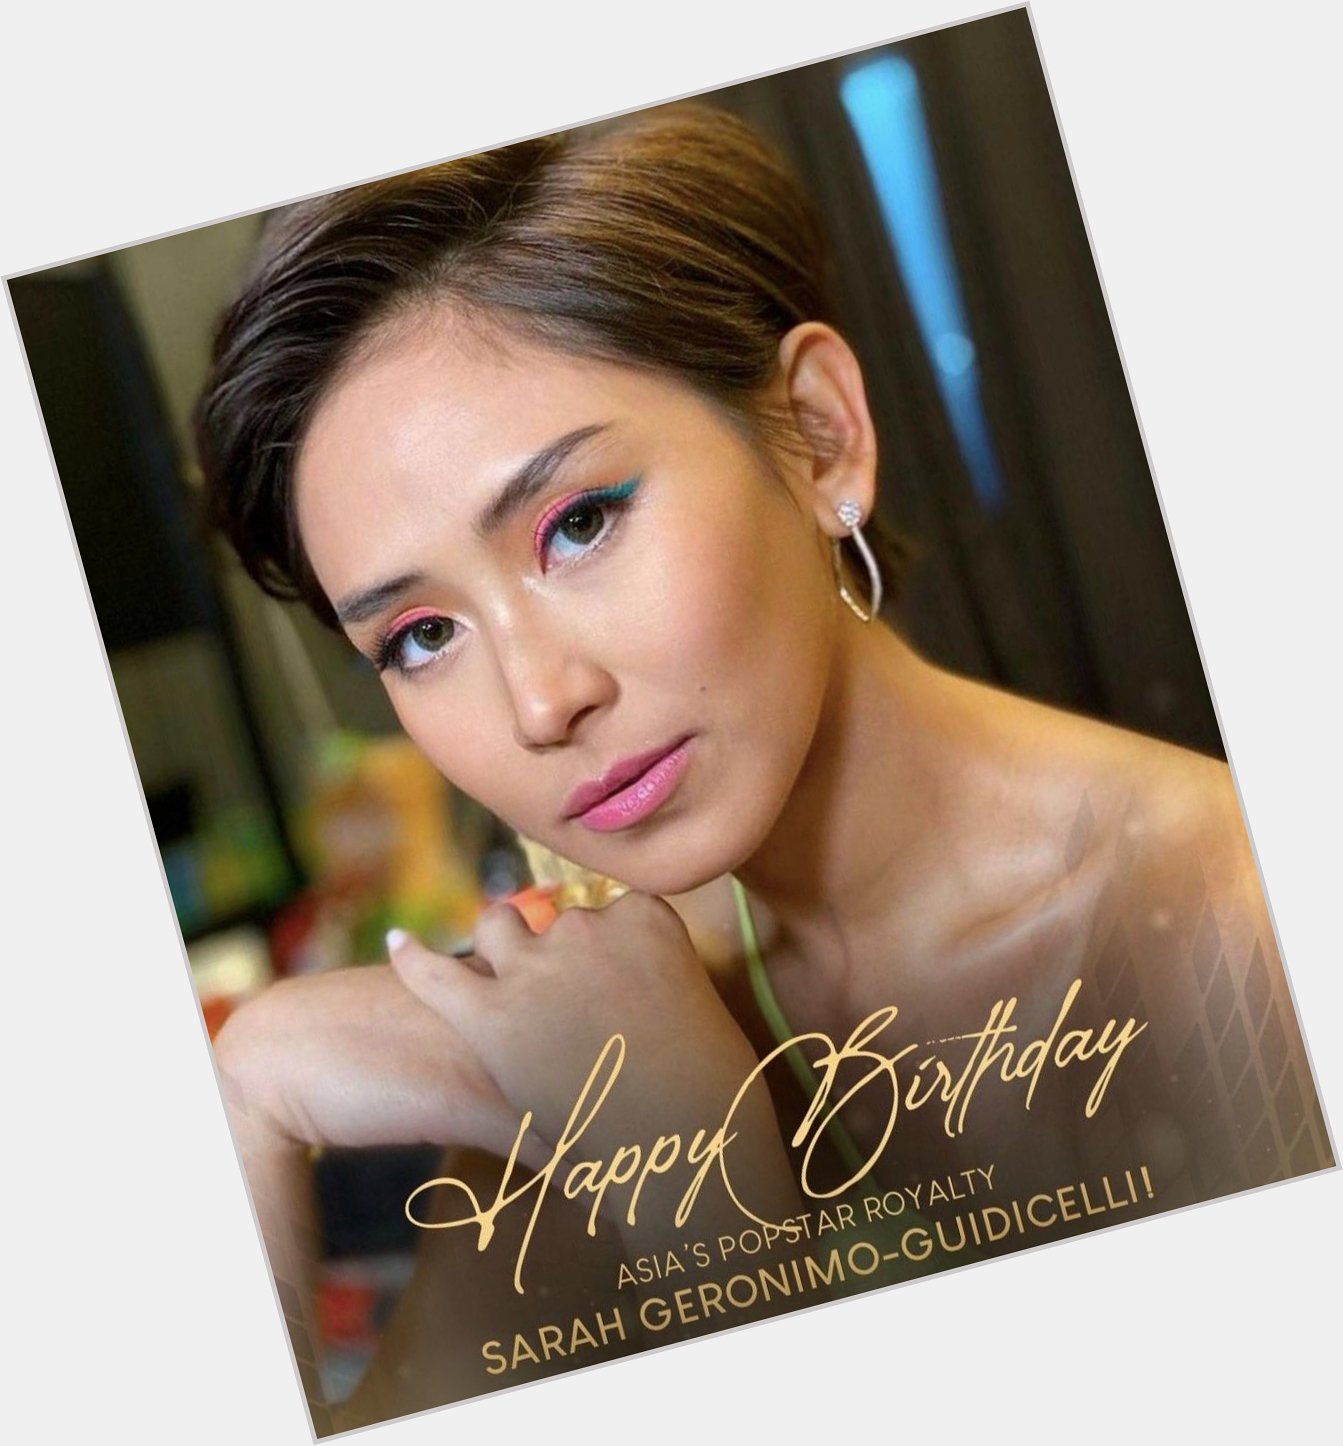 Happy Birthday God Bless you and Stay safe.
SARAH GERONIMO DAY 